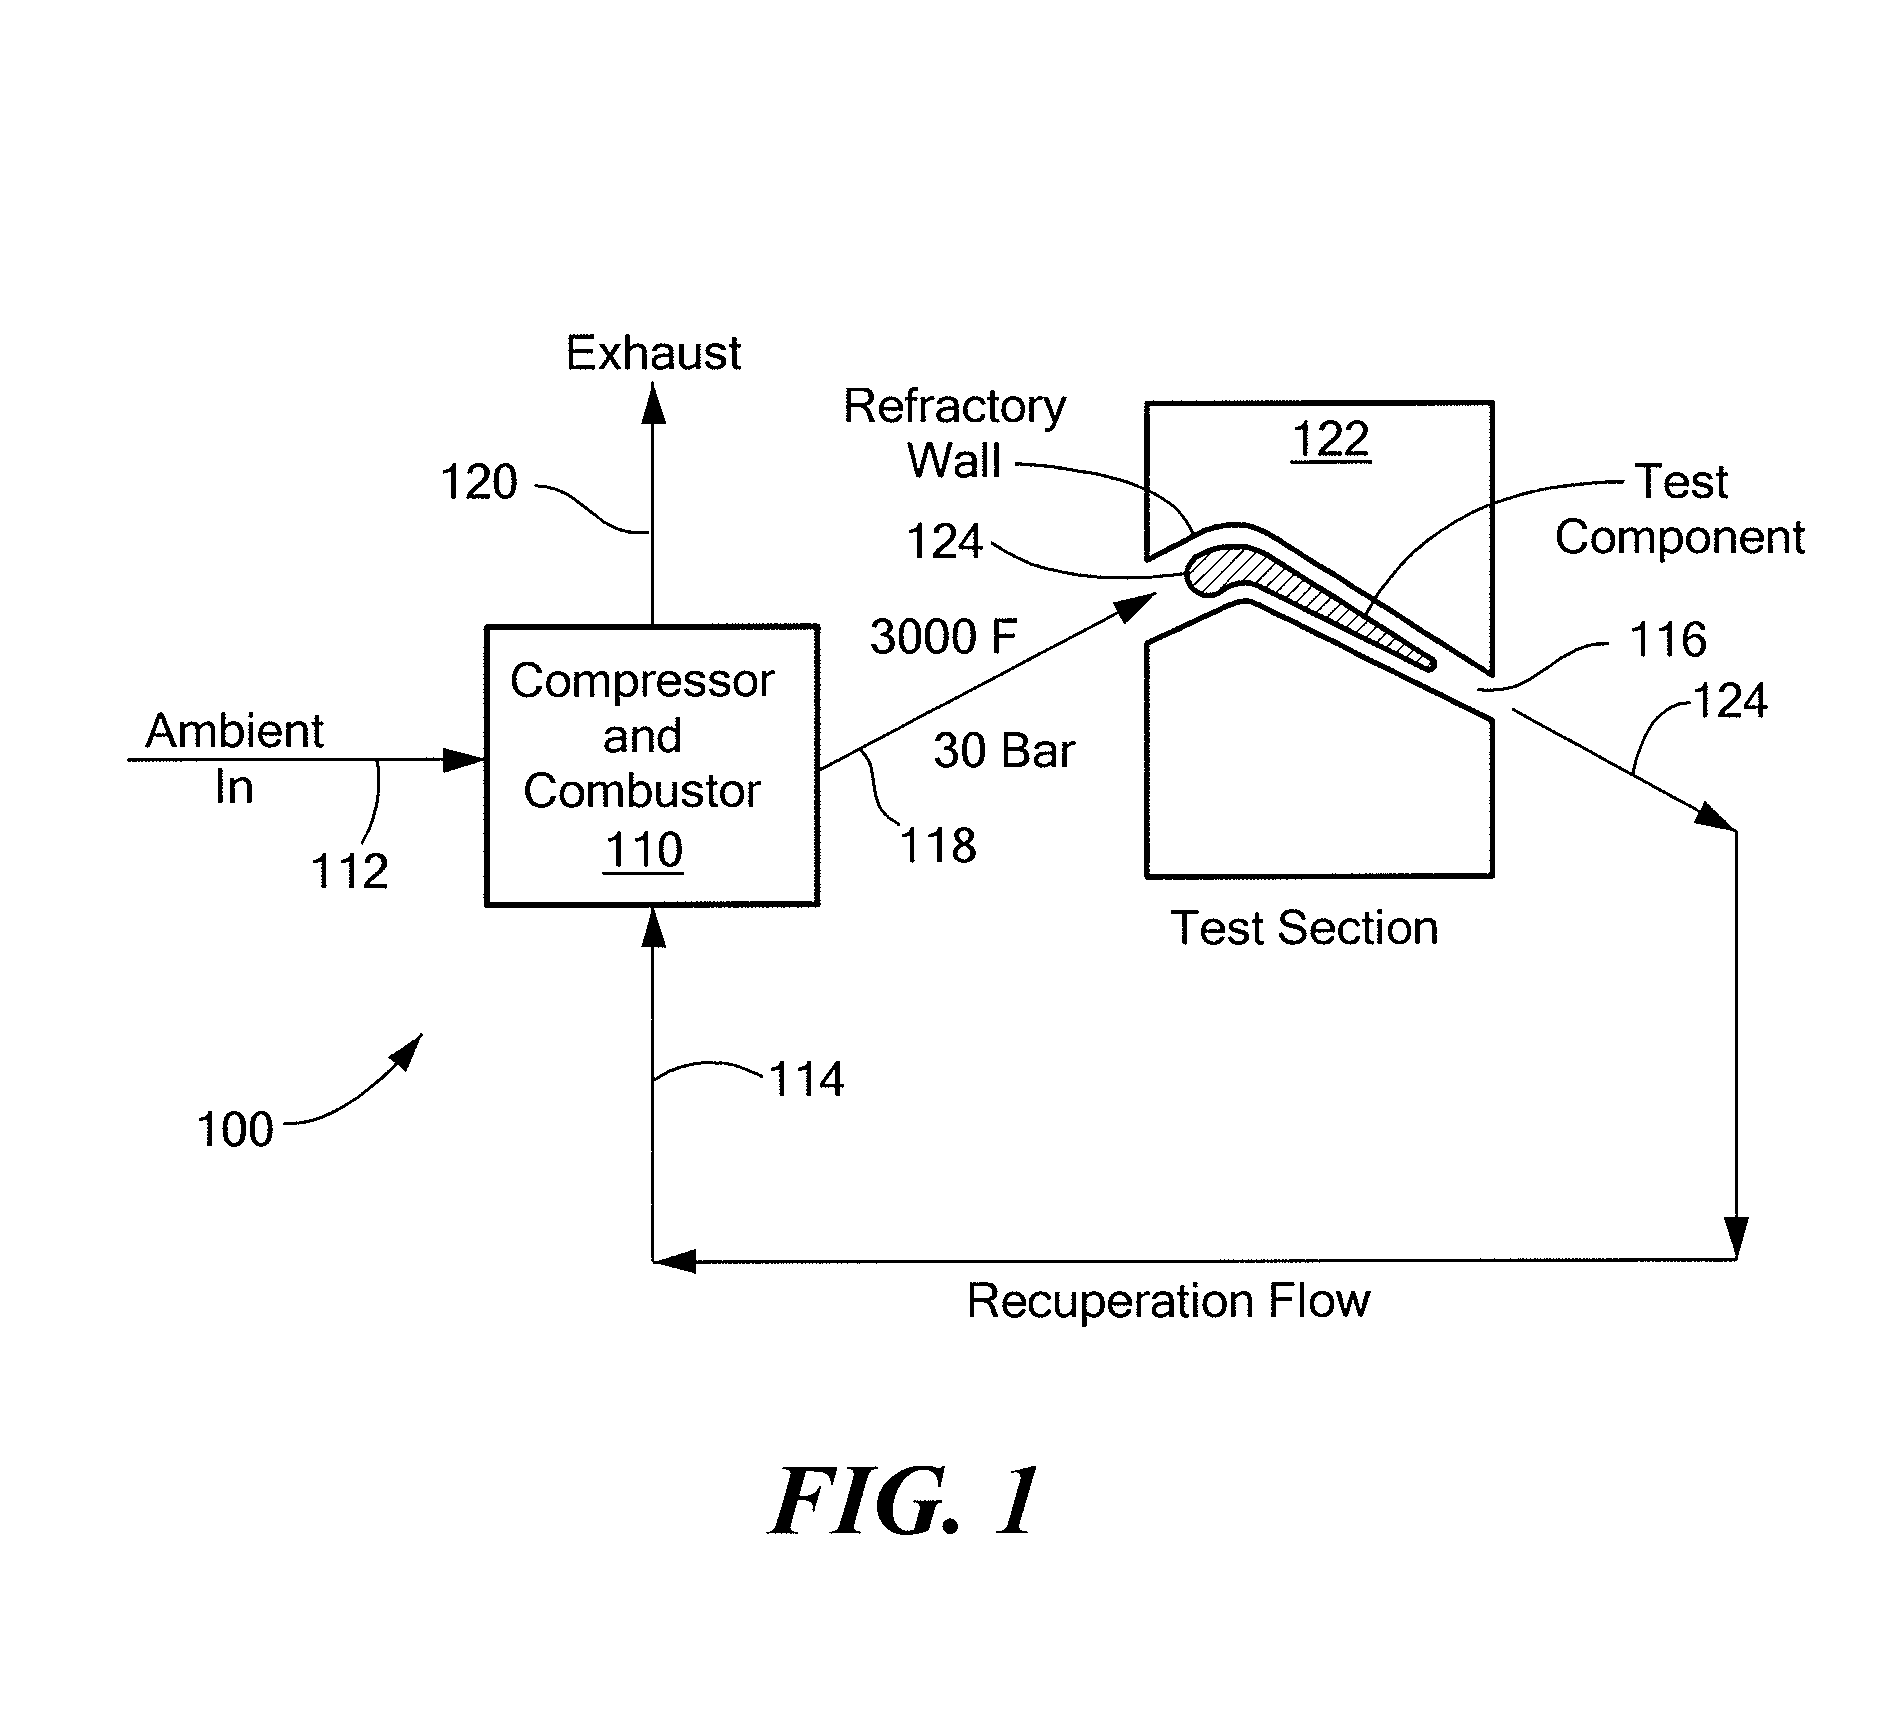 System and method for imposing thermal gradients on thin walled test objects and components